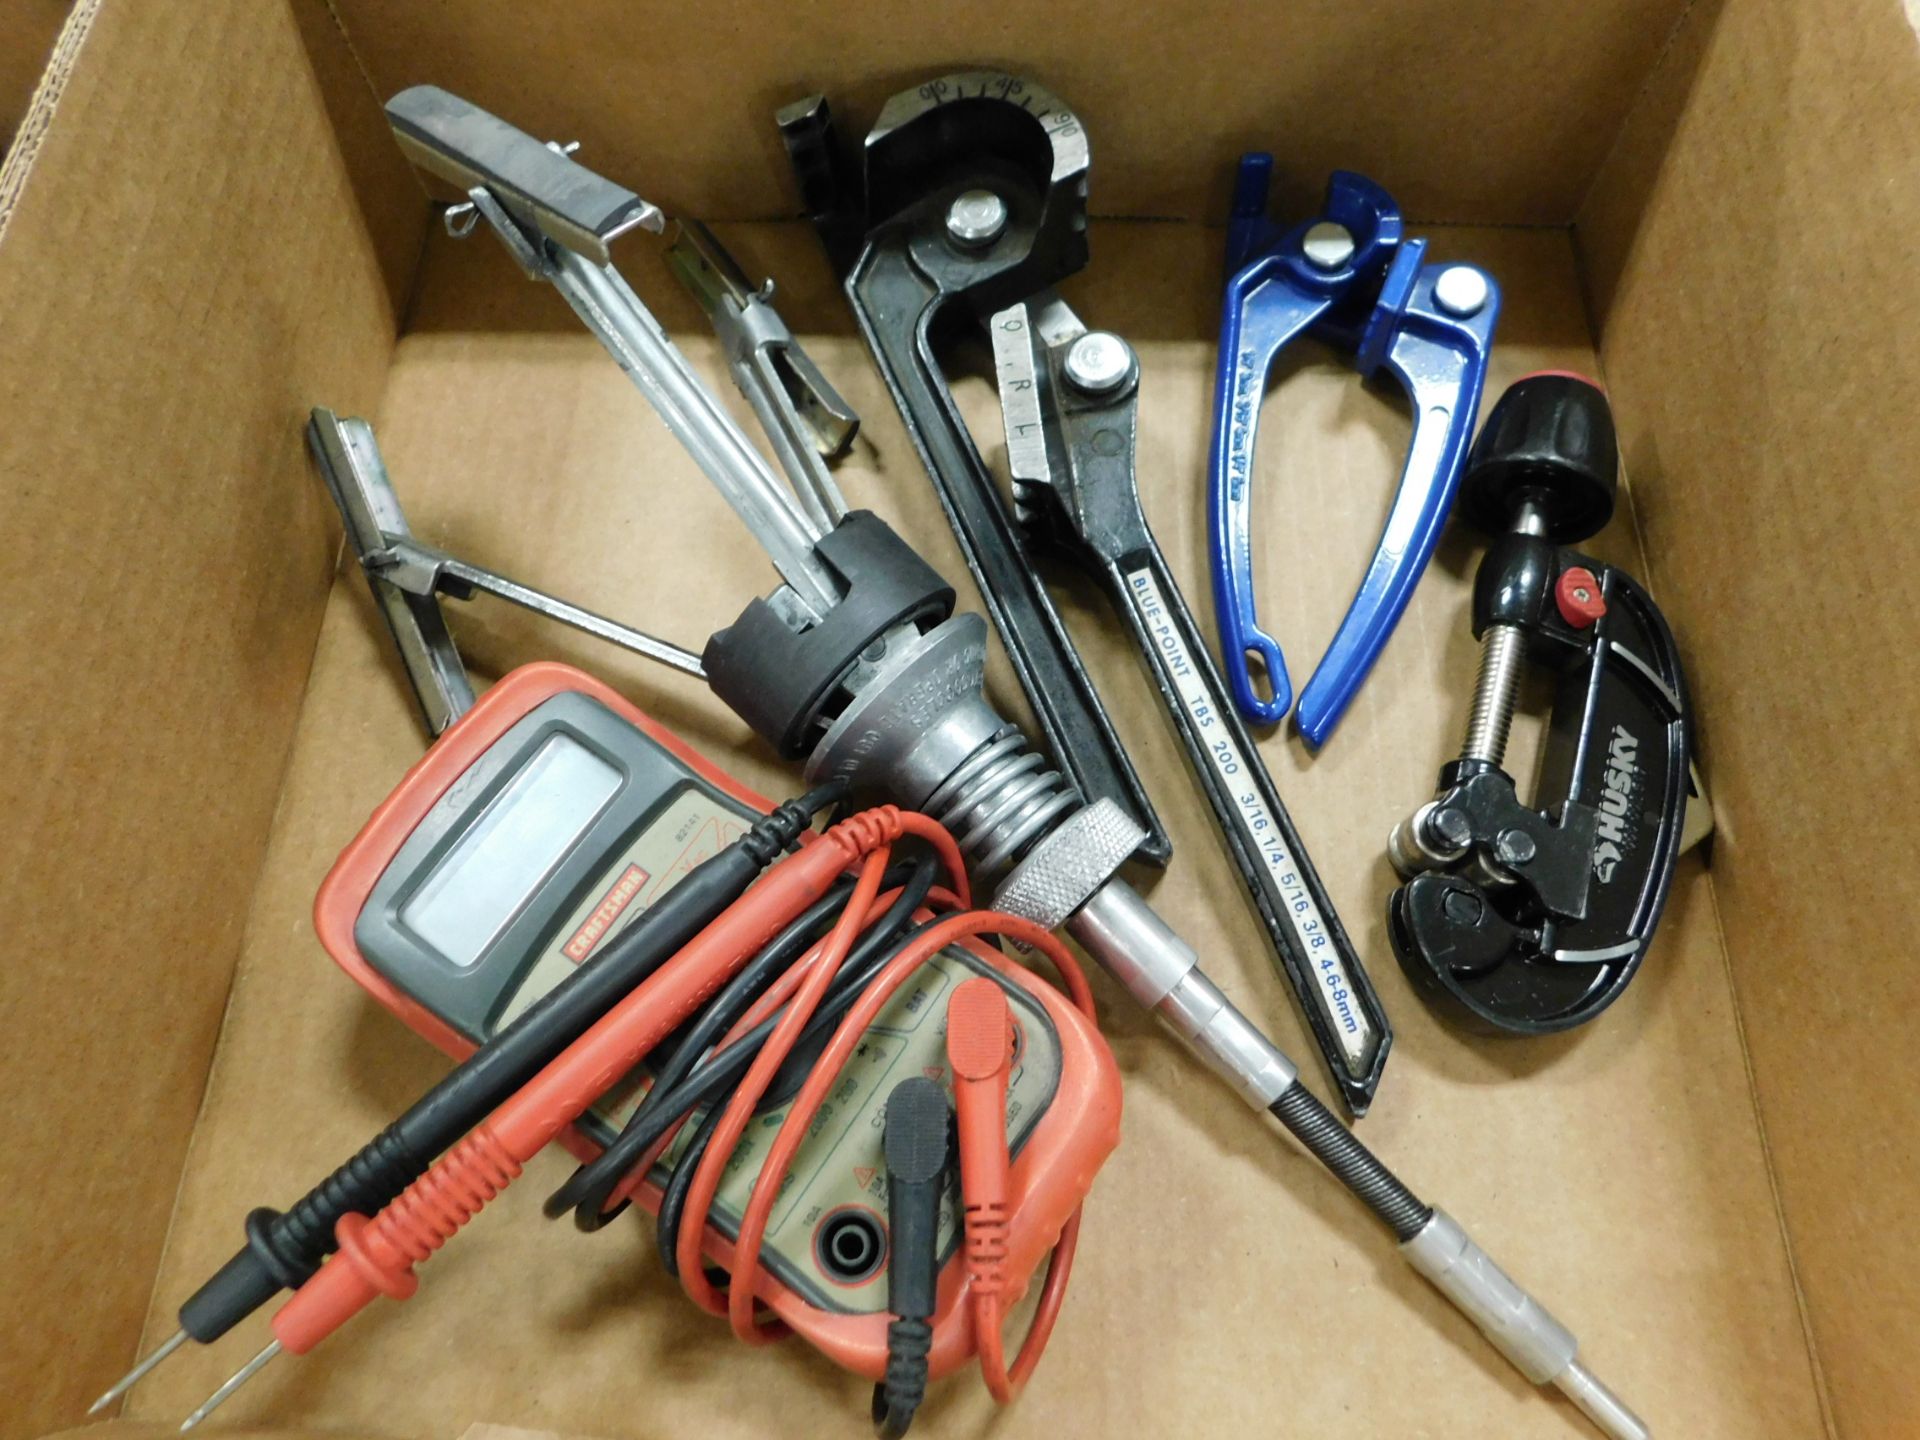 Tubing Cutters and Benders, Hone and Multimeter